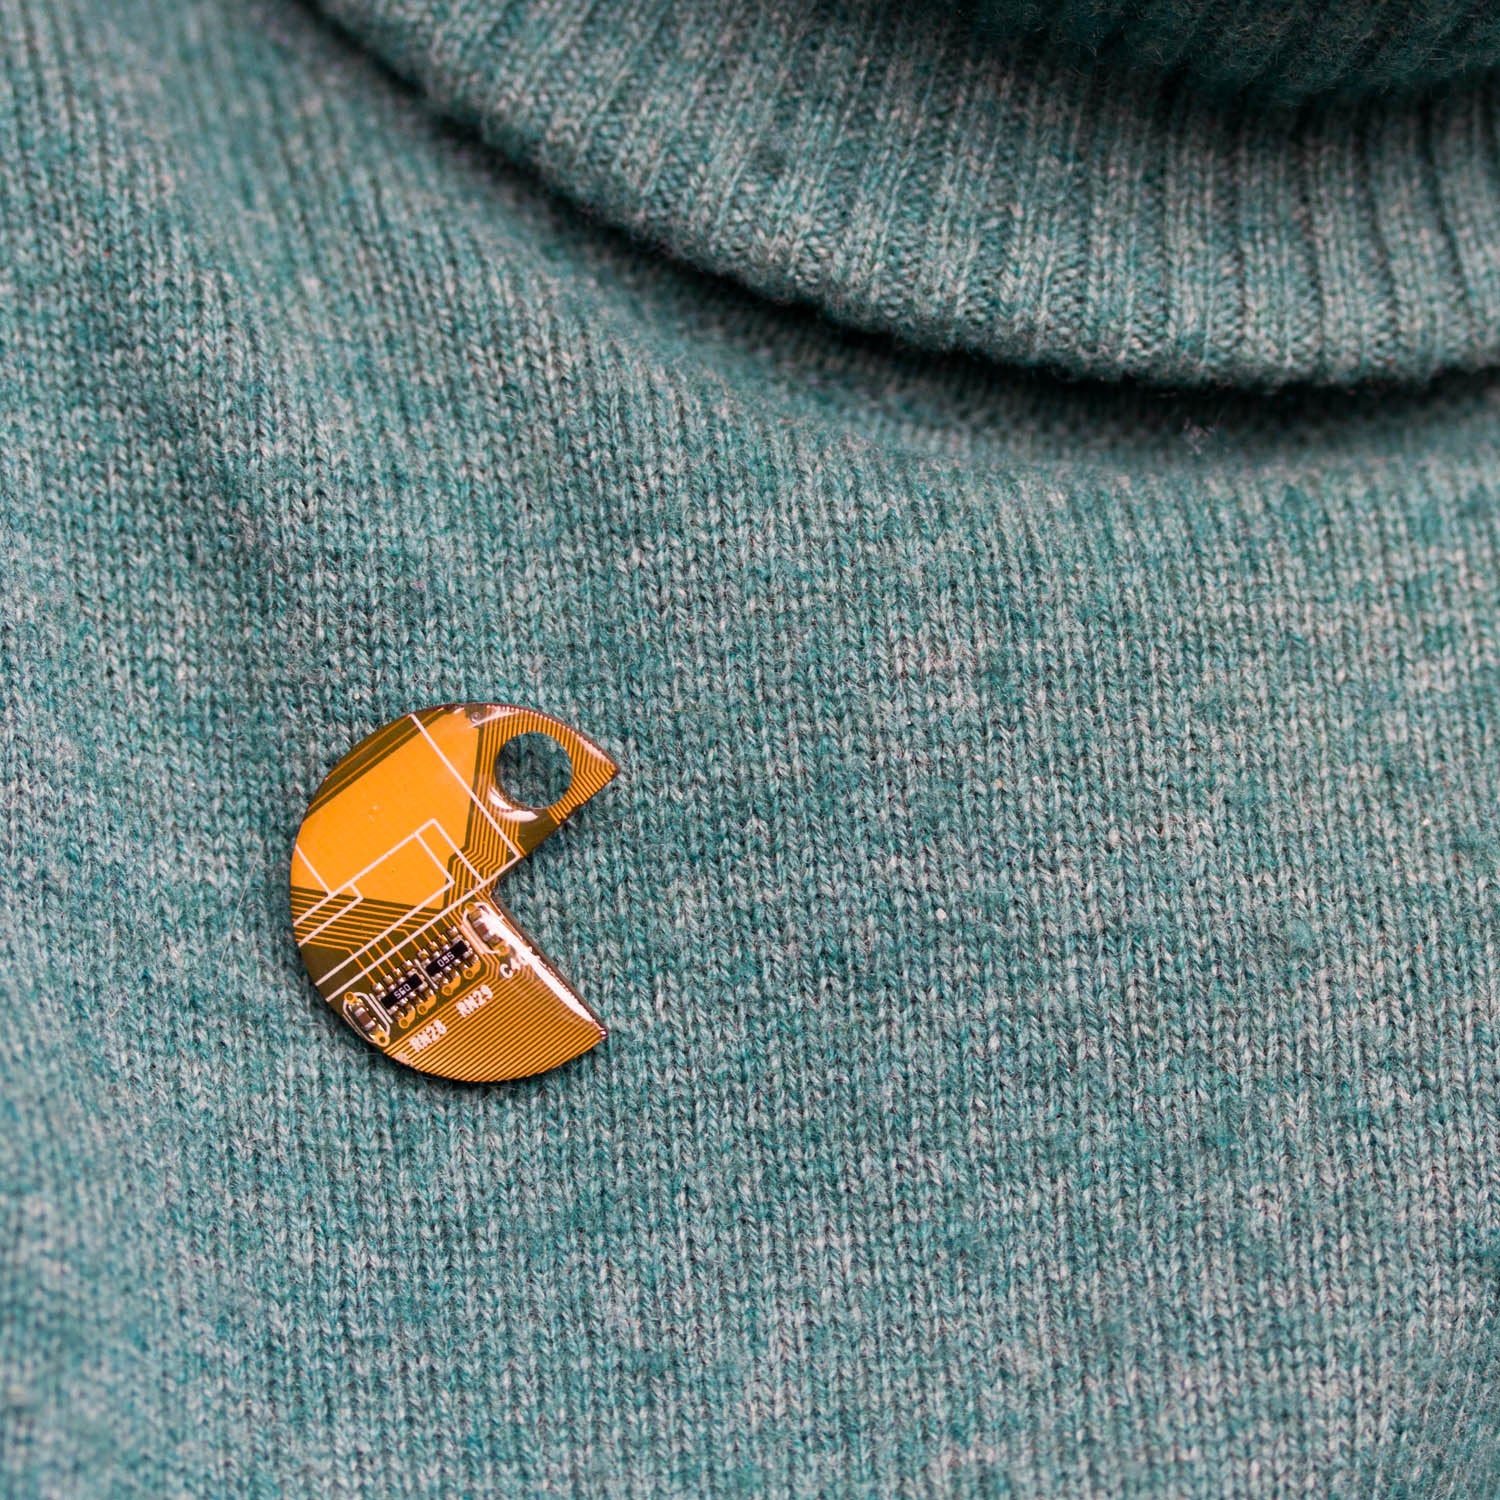 Pacman inspired Pin made with recycled Circuit board 